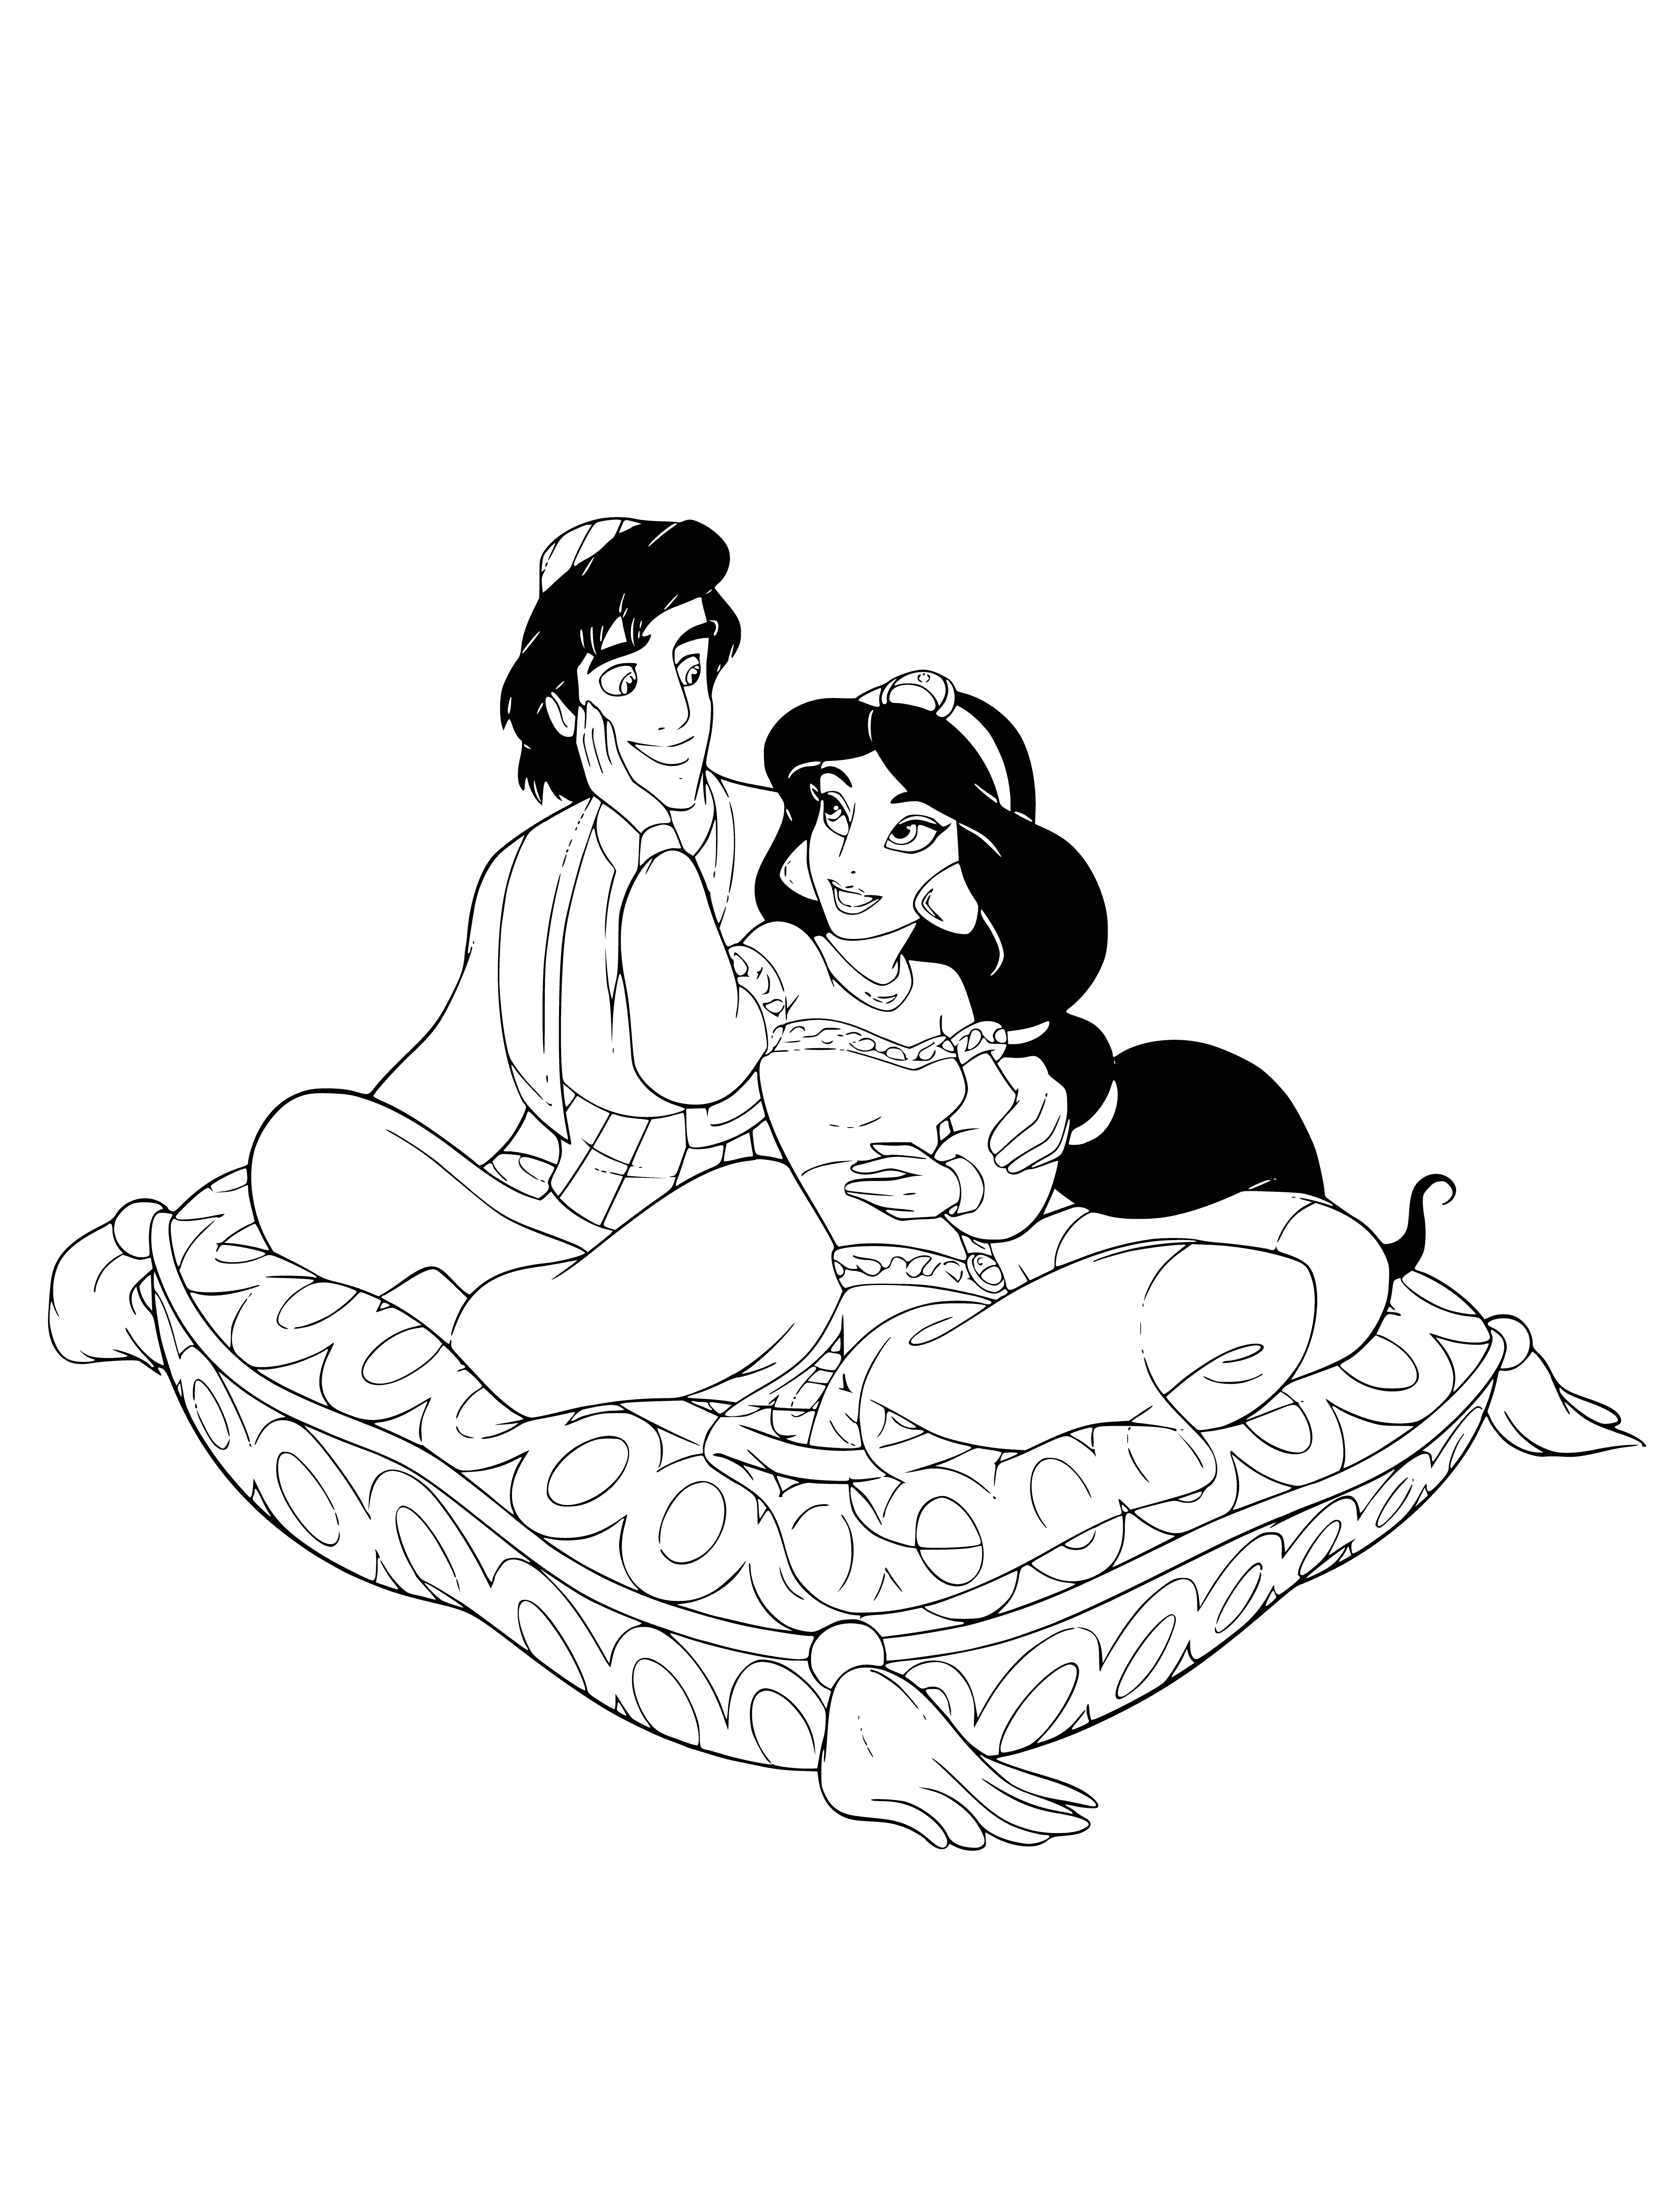 coloring page: Aladdin & Jasmine surrounded by friends in coloring page. Princess looking off into the distance, Aladdin to the side. #Aladdin